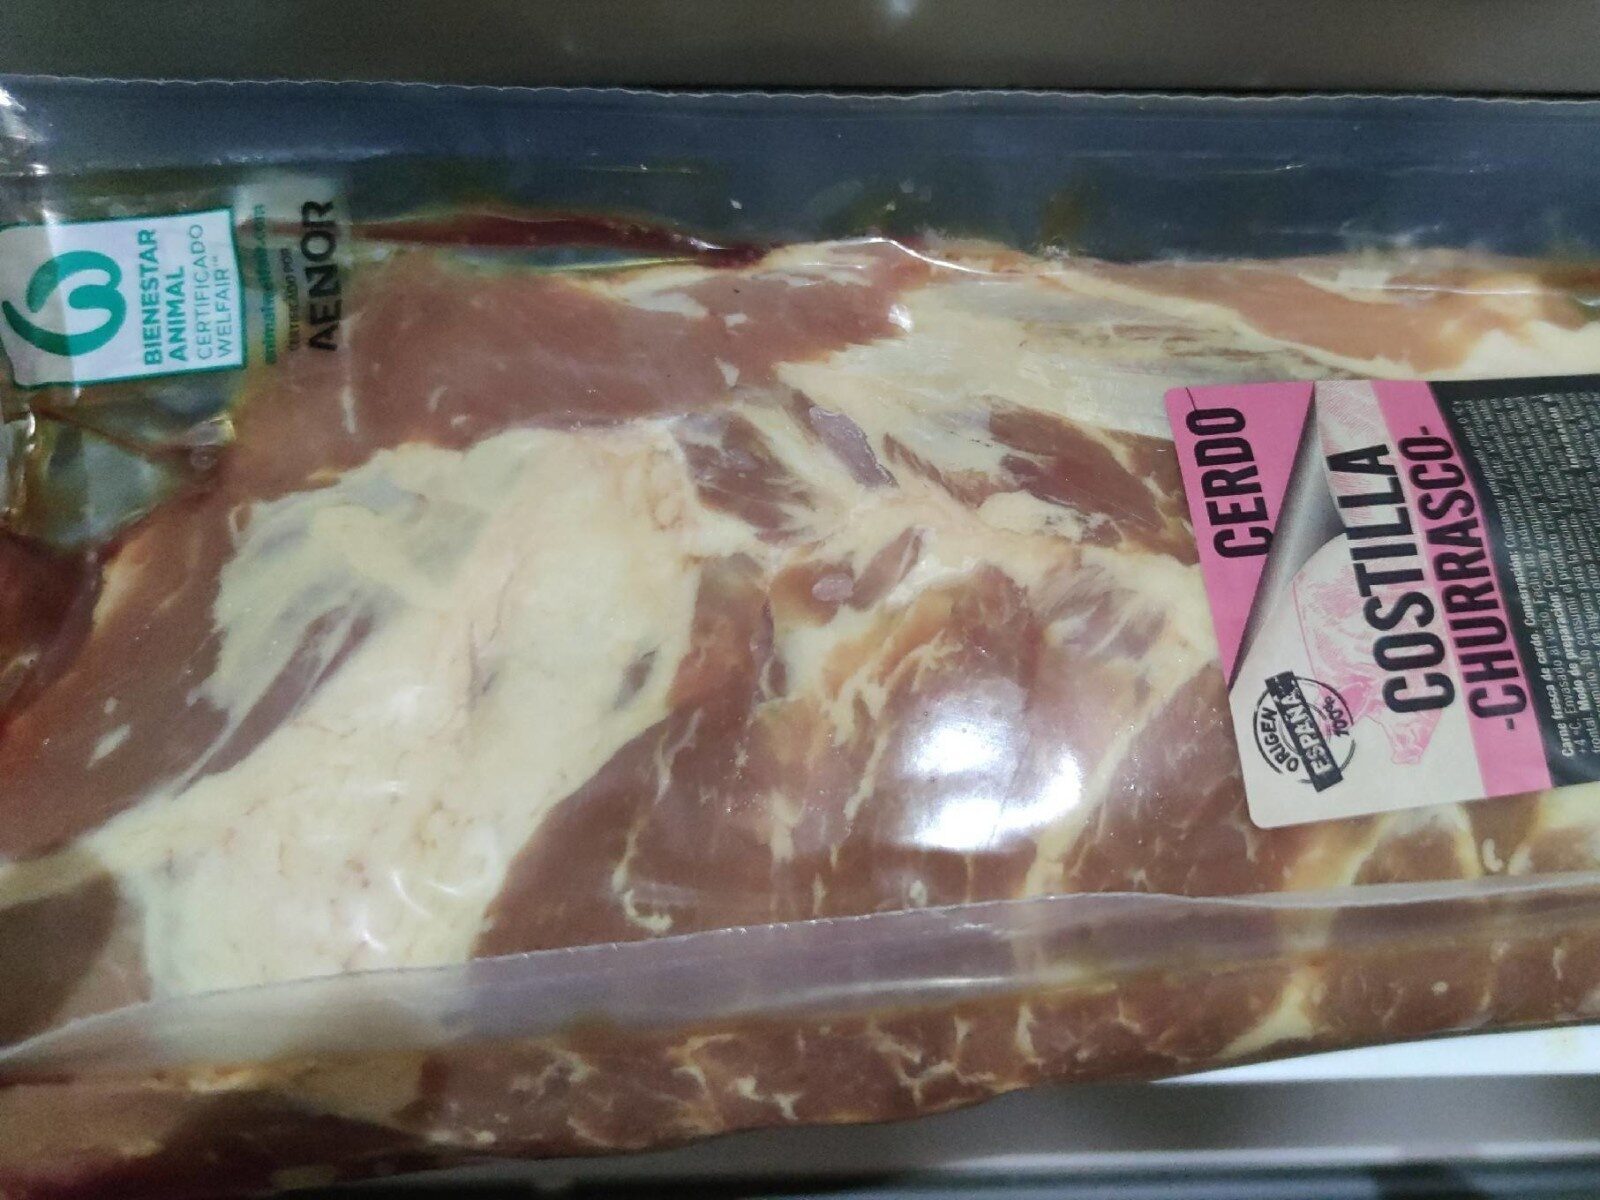 freezer bags for meat?